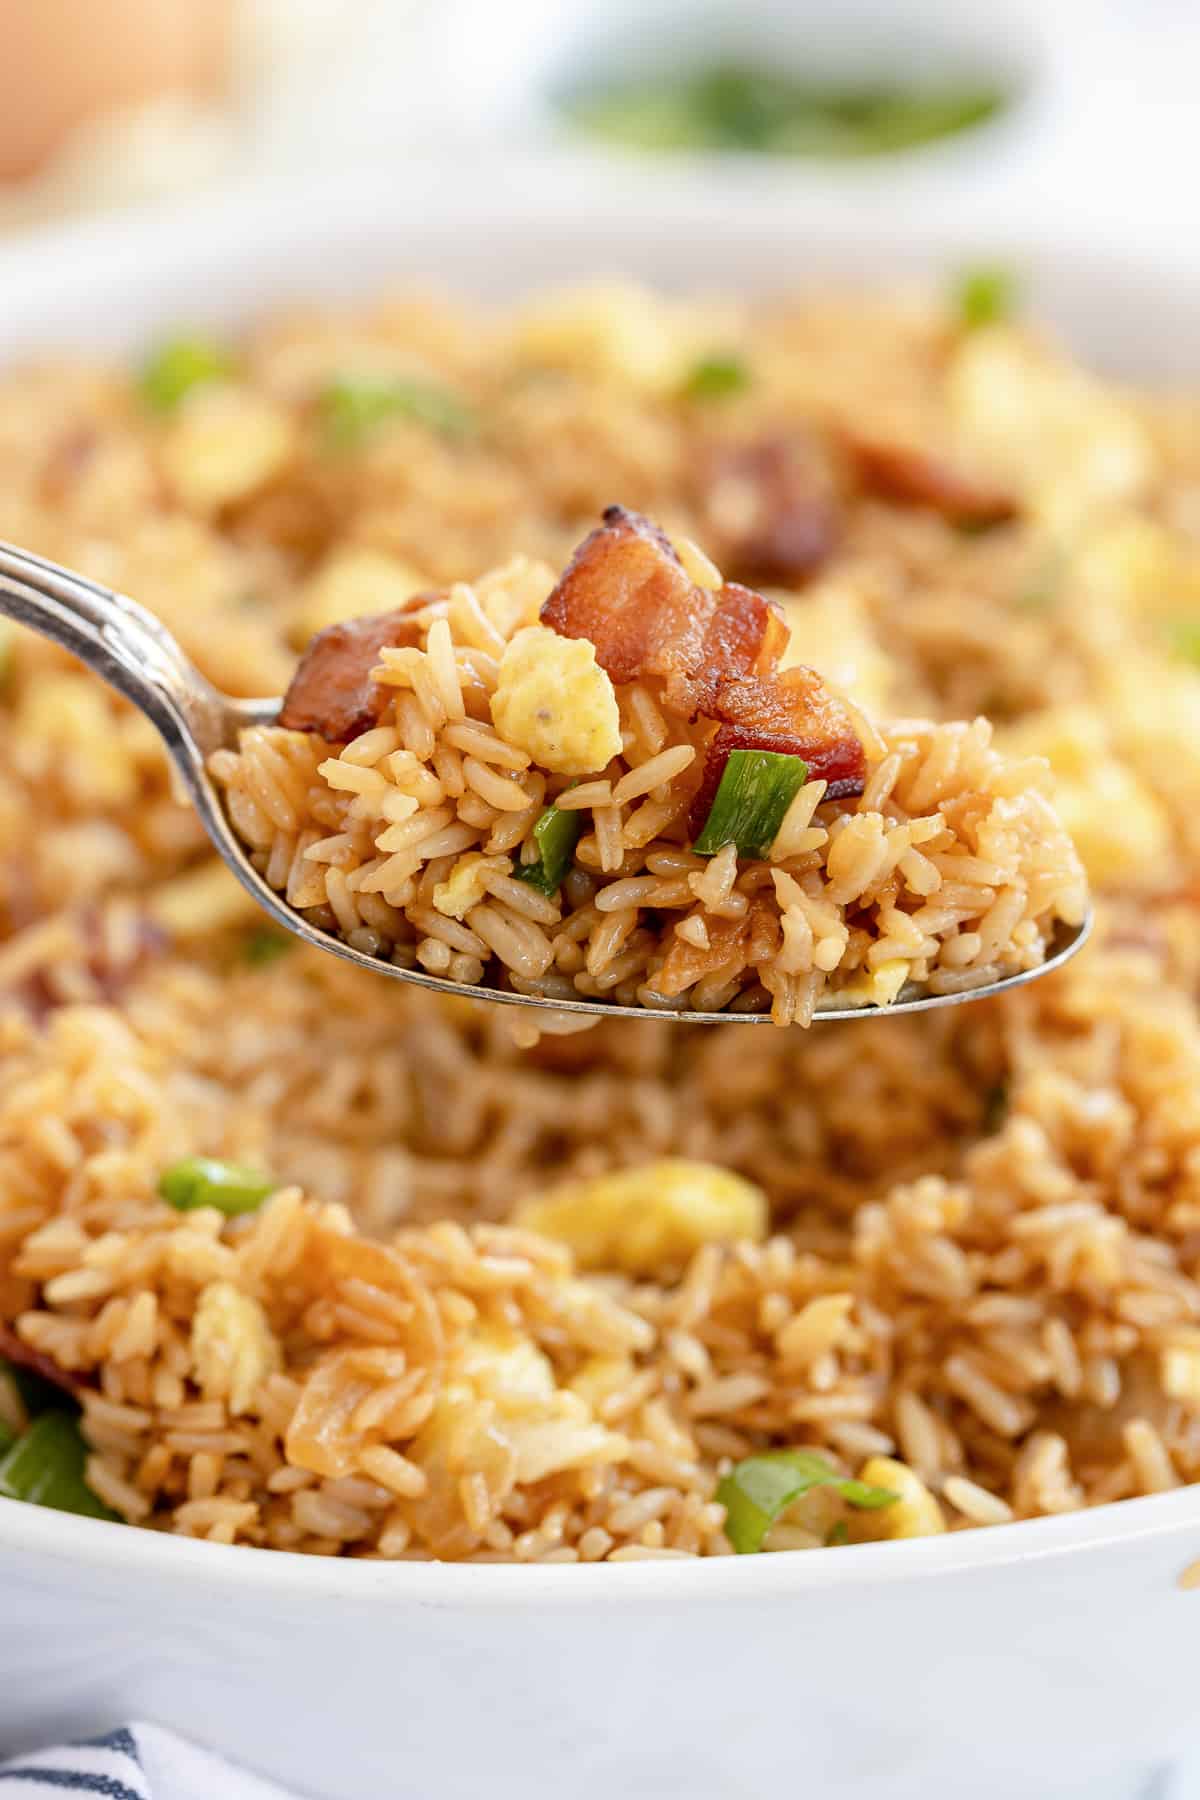 A spoon lifts fried rice from a serving bowl.